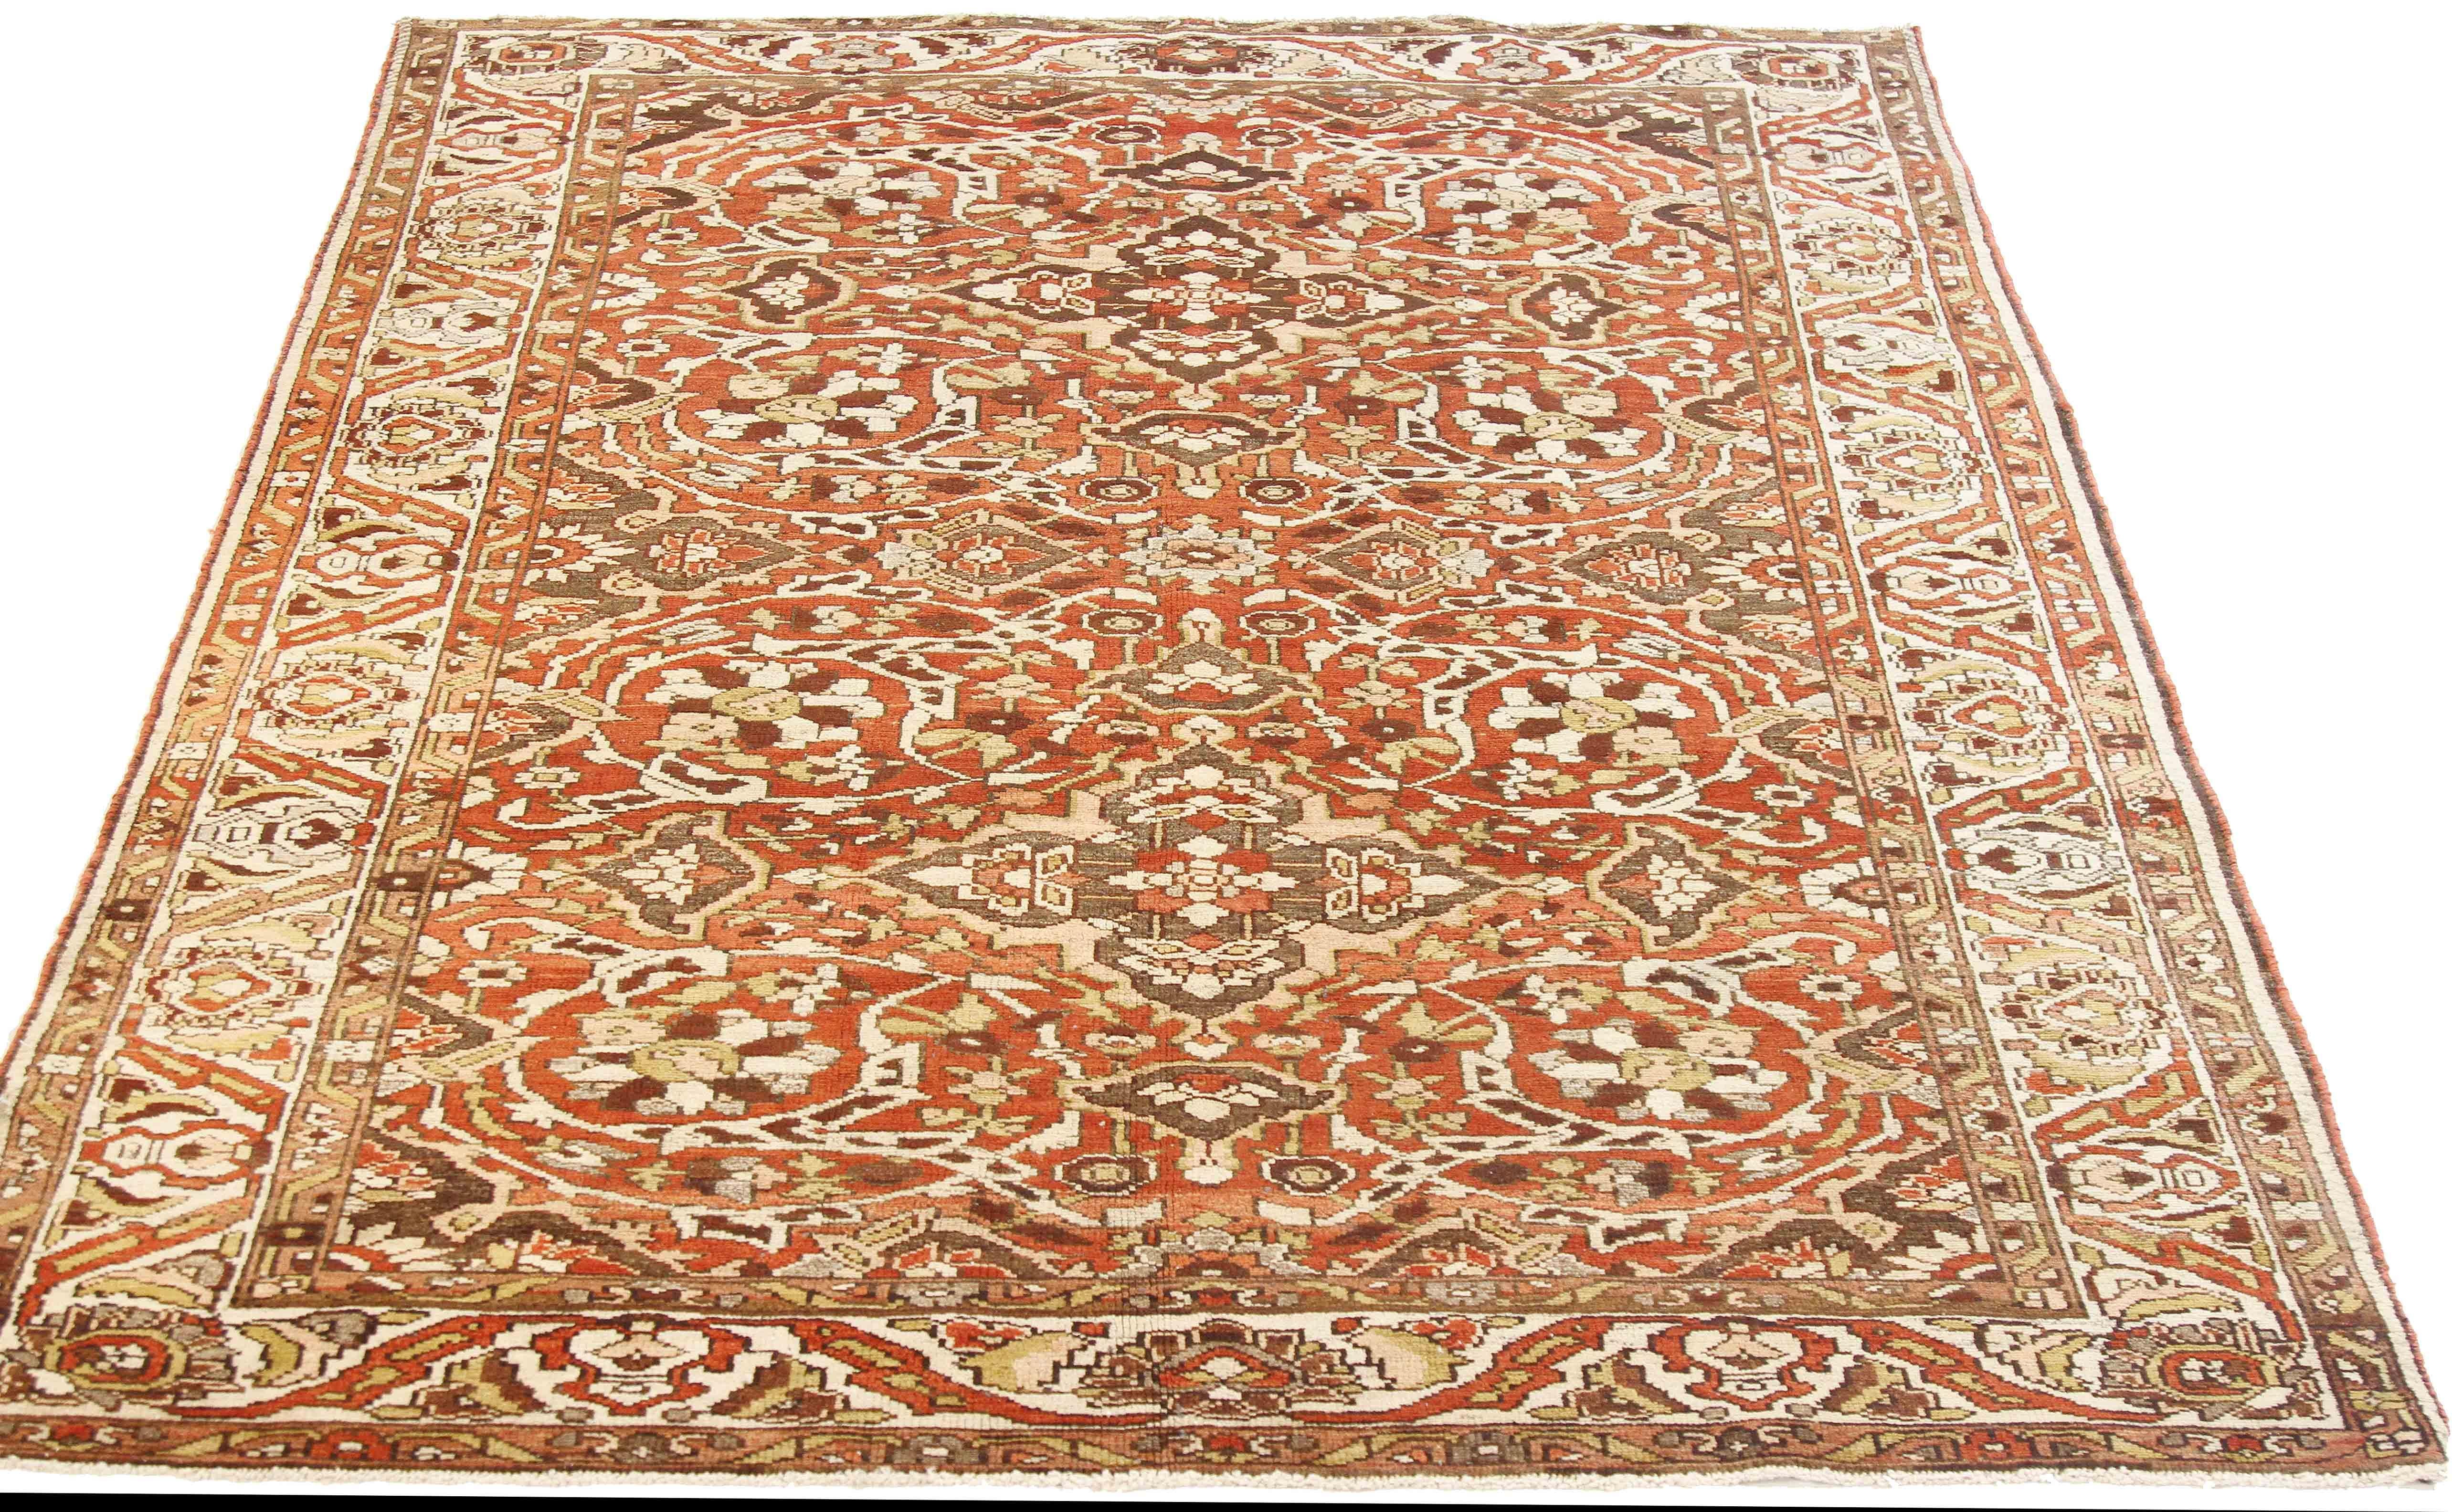 Antique Persian rug handwoven from the finest sheep’s wool and colored with all-natural vegetable dyes that are safe for humans and pets. It’s a traditional Bakhtiar design highlighted by a floral field in brown, red and ivory. It’s a beautiful